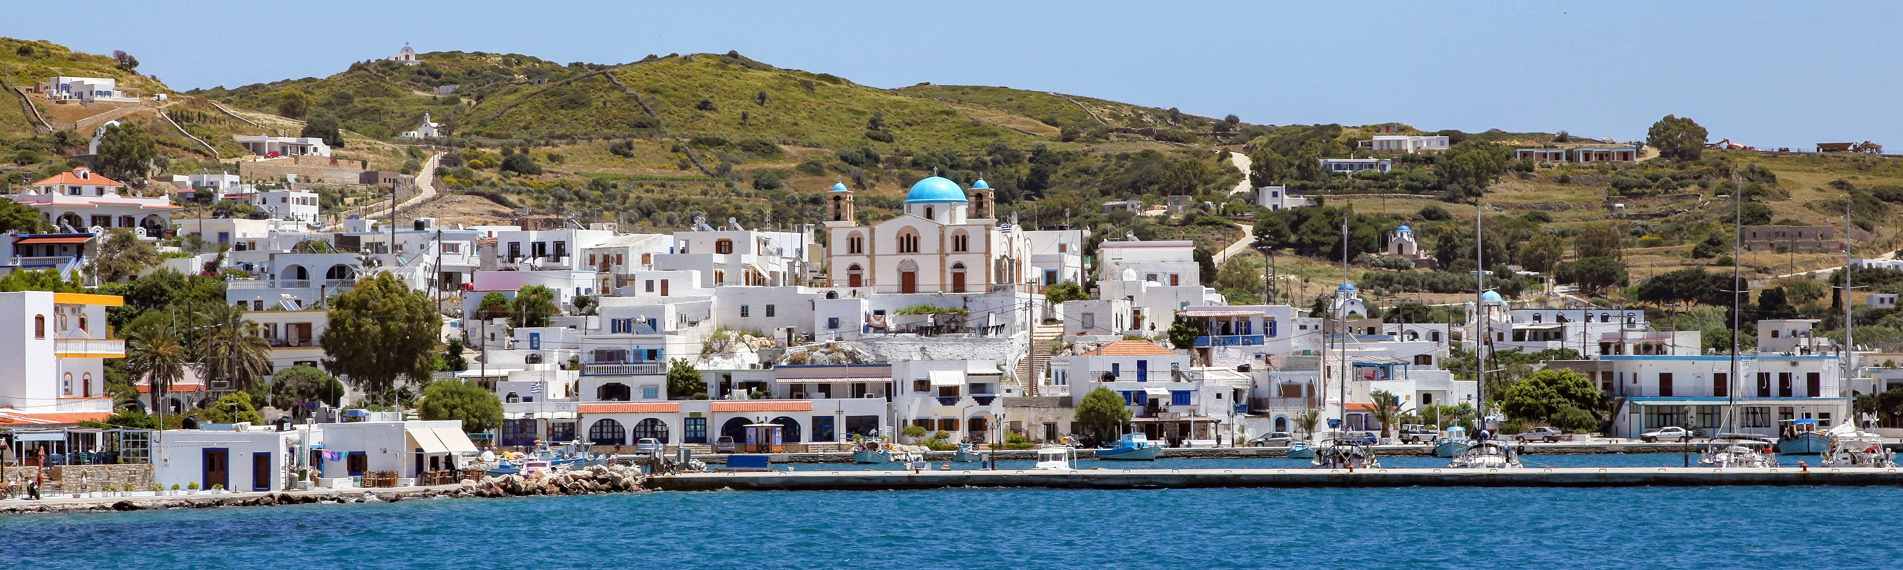 Lipsi in the Dodecanese, a view of a village from sea.